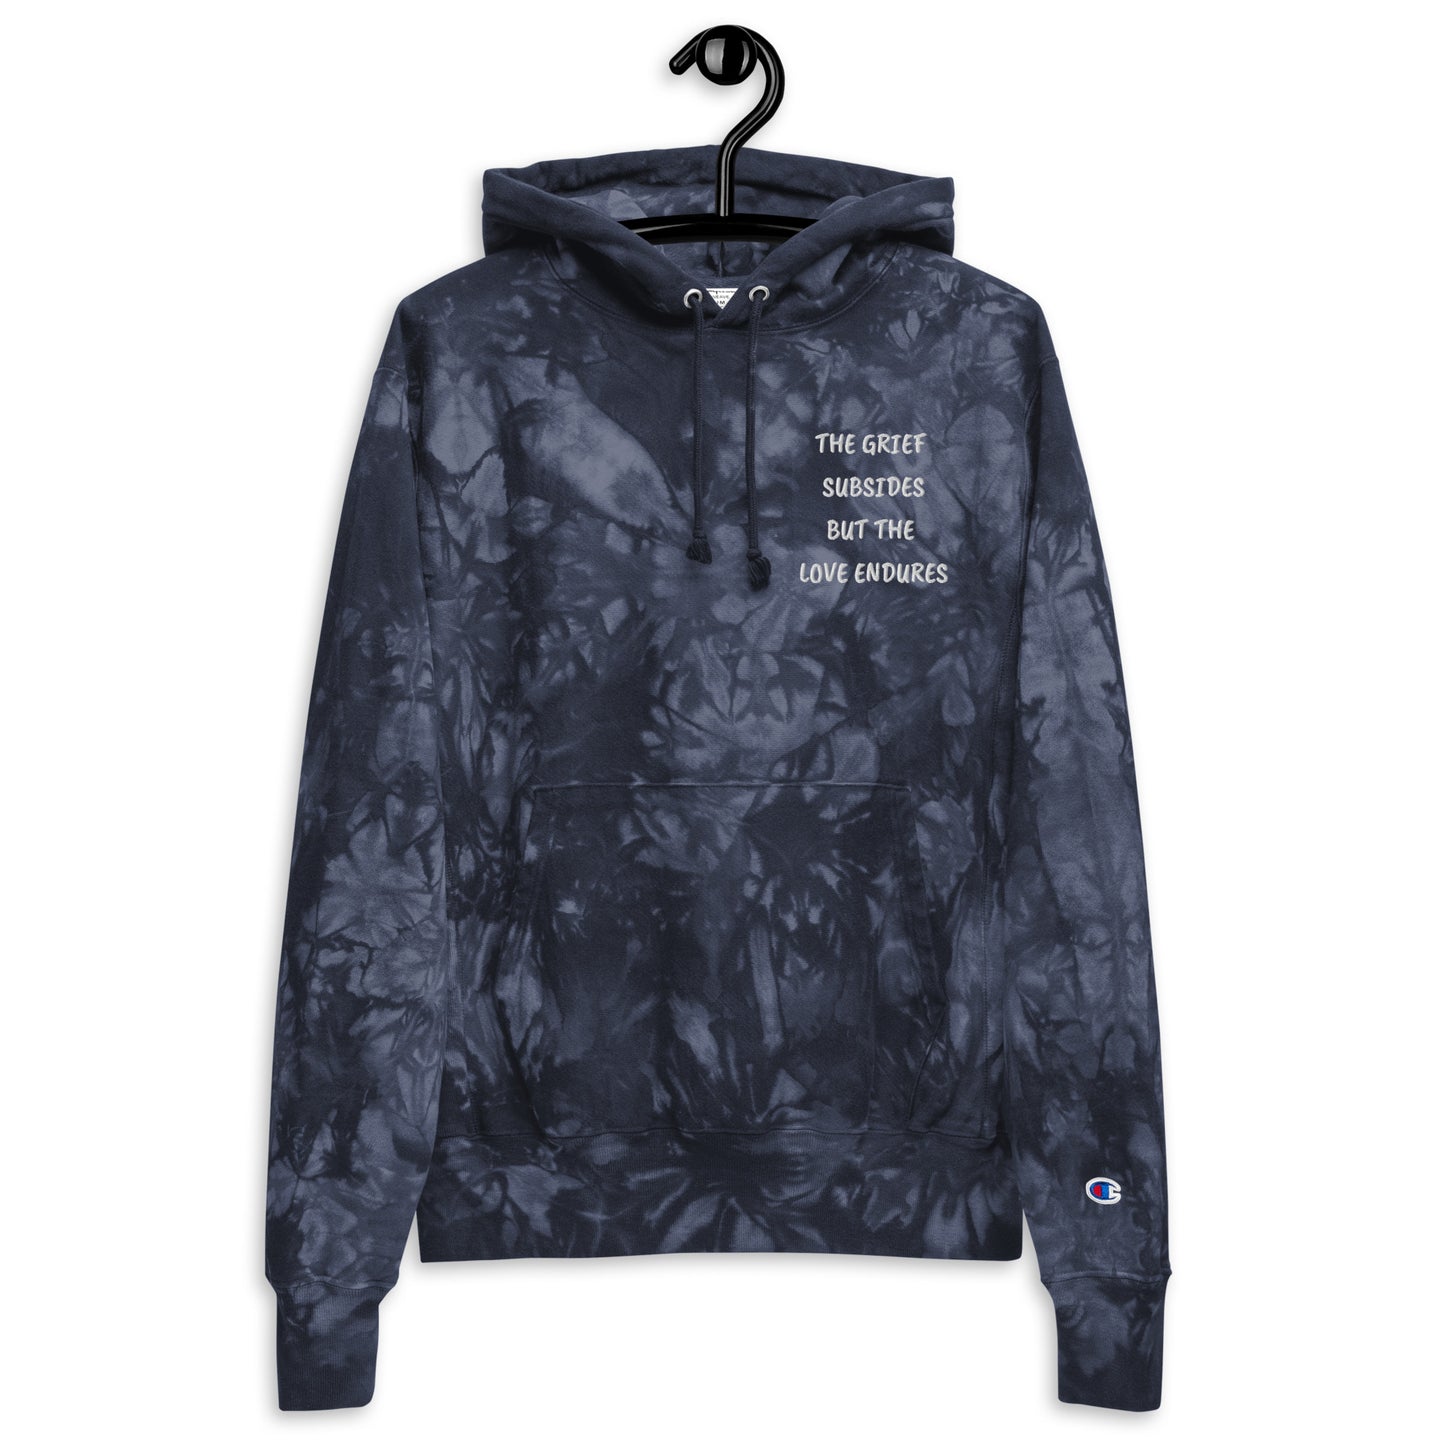 Unisex, navy colored Champion tie-dye hoodie. Embroidered quote, "The Grief Subsides But The Love Endures." Two-ply hood with matching drawcords, front pouch pocket, and embroidered "C" Champion logo on left sleeve. 1×1 rib knit side panels, sleeve cuffs, and bottom hem. Sizes small, medium, large, and extra large. 